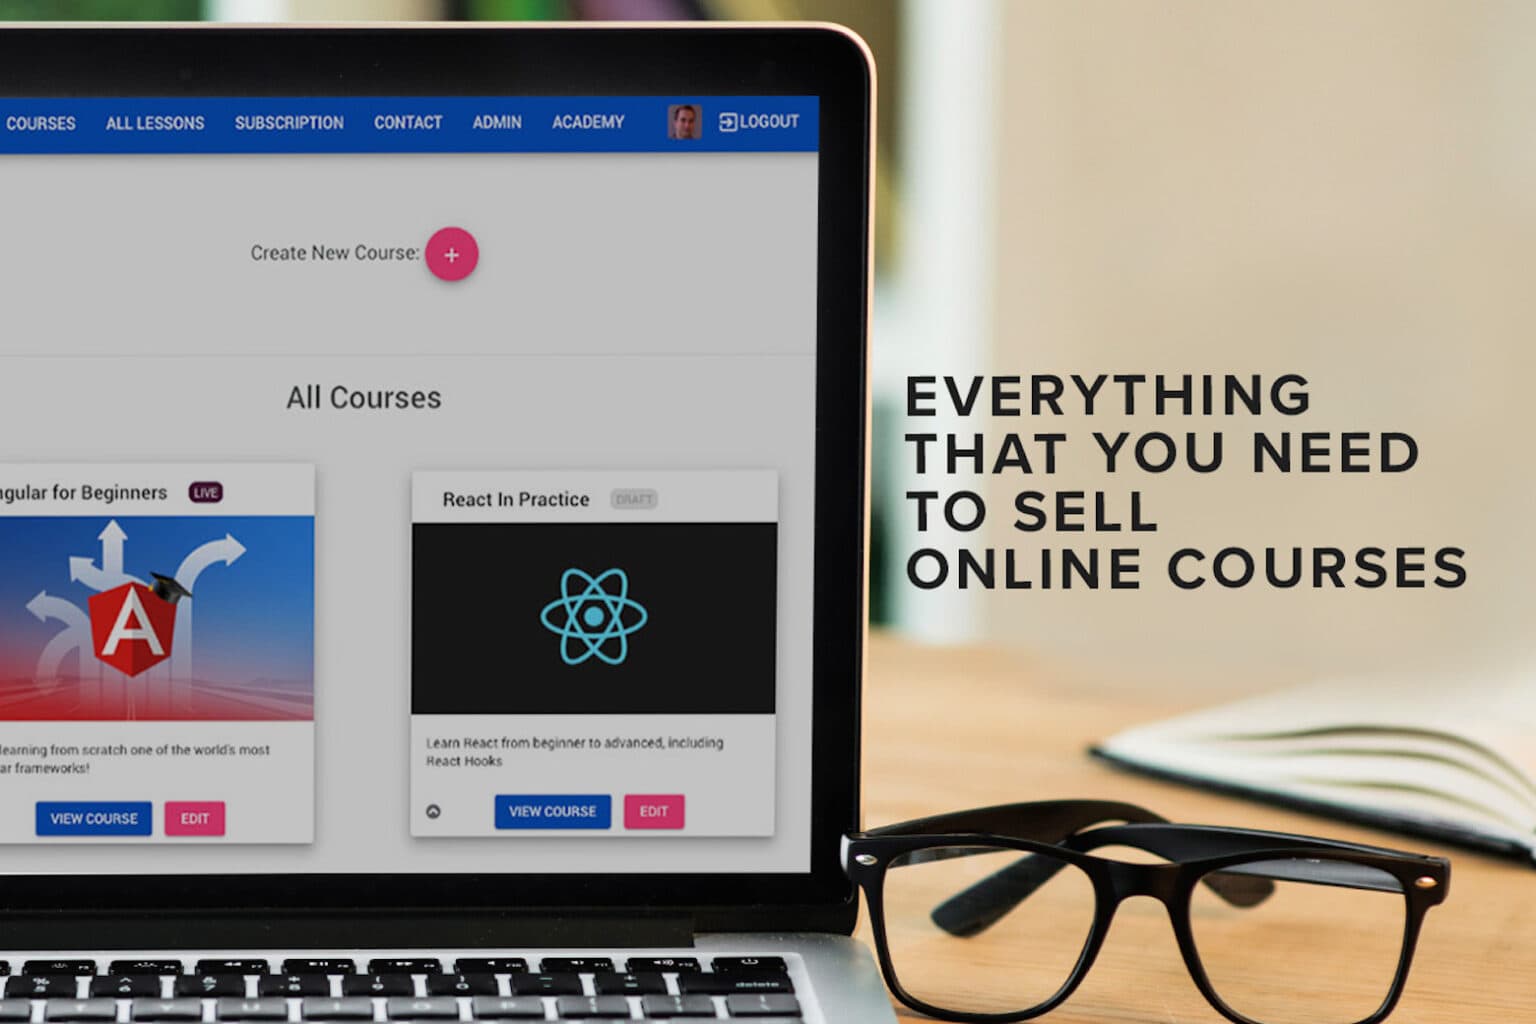 Sell the online course you’ve always wanted to with this all-in-one platform.